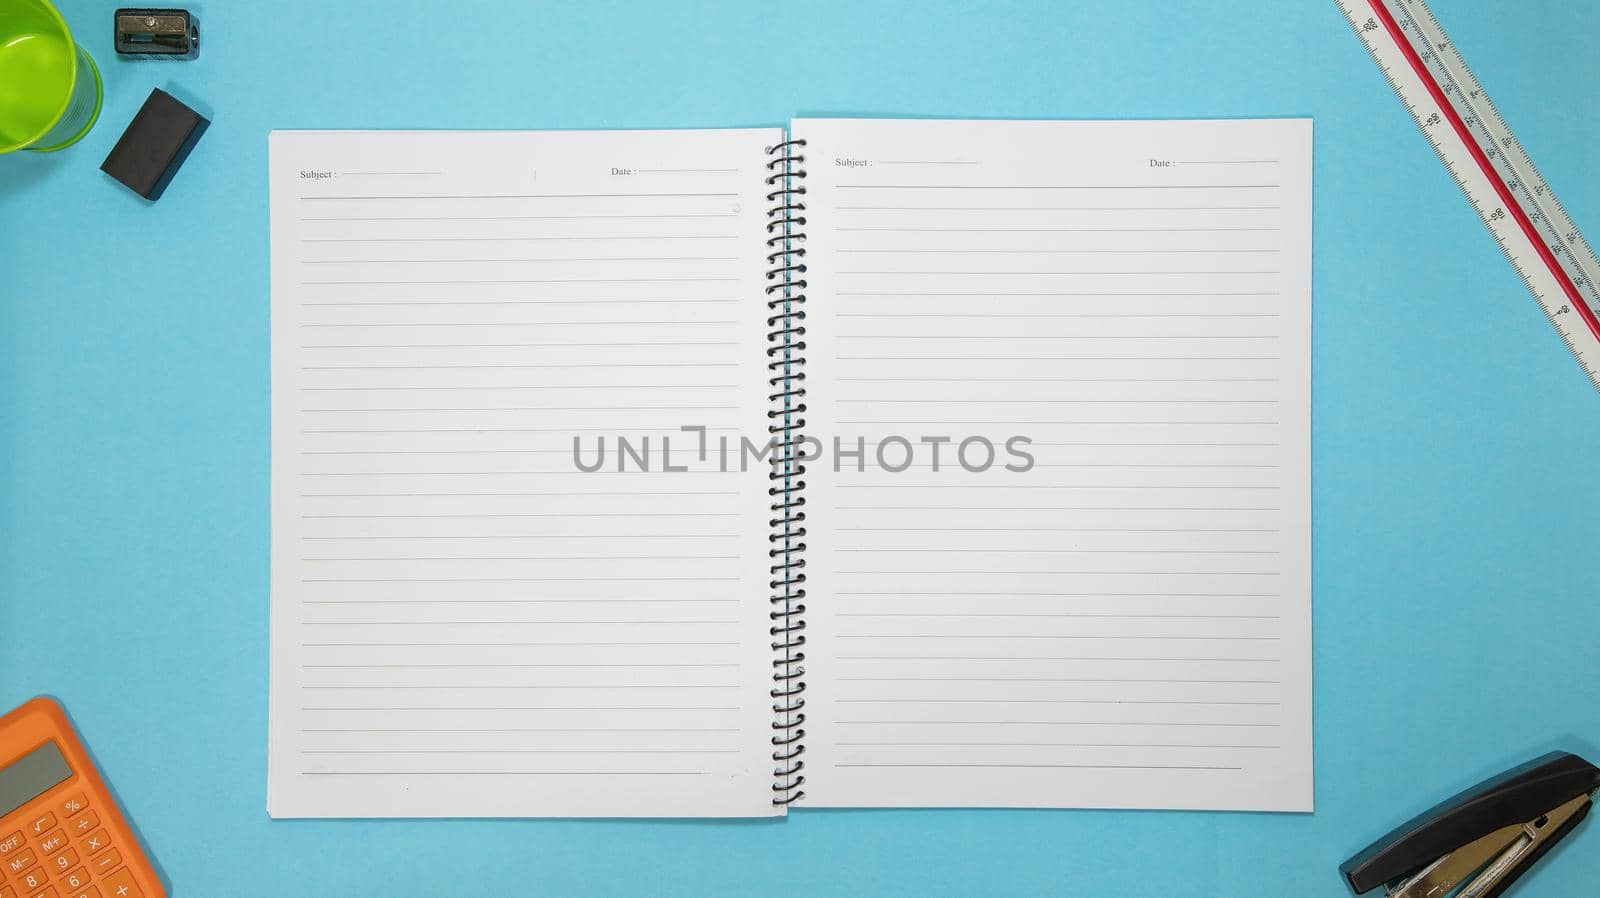 Office table desk with set of colorful supplies, blue blank note pad, cup, pen, pc, crumpled paper, flower on blue background. Top view and copy space for text